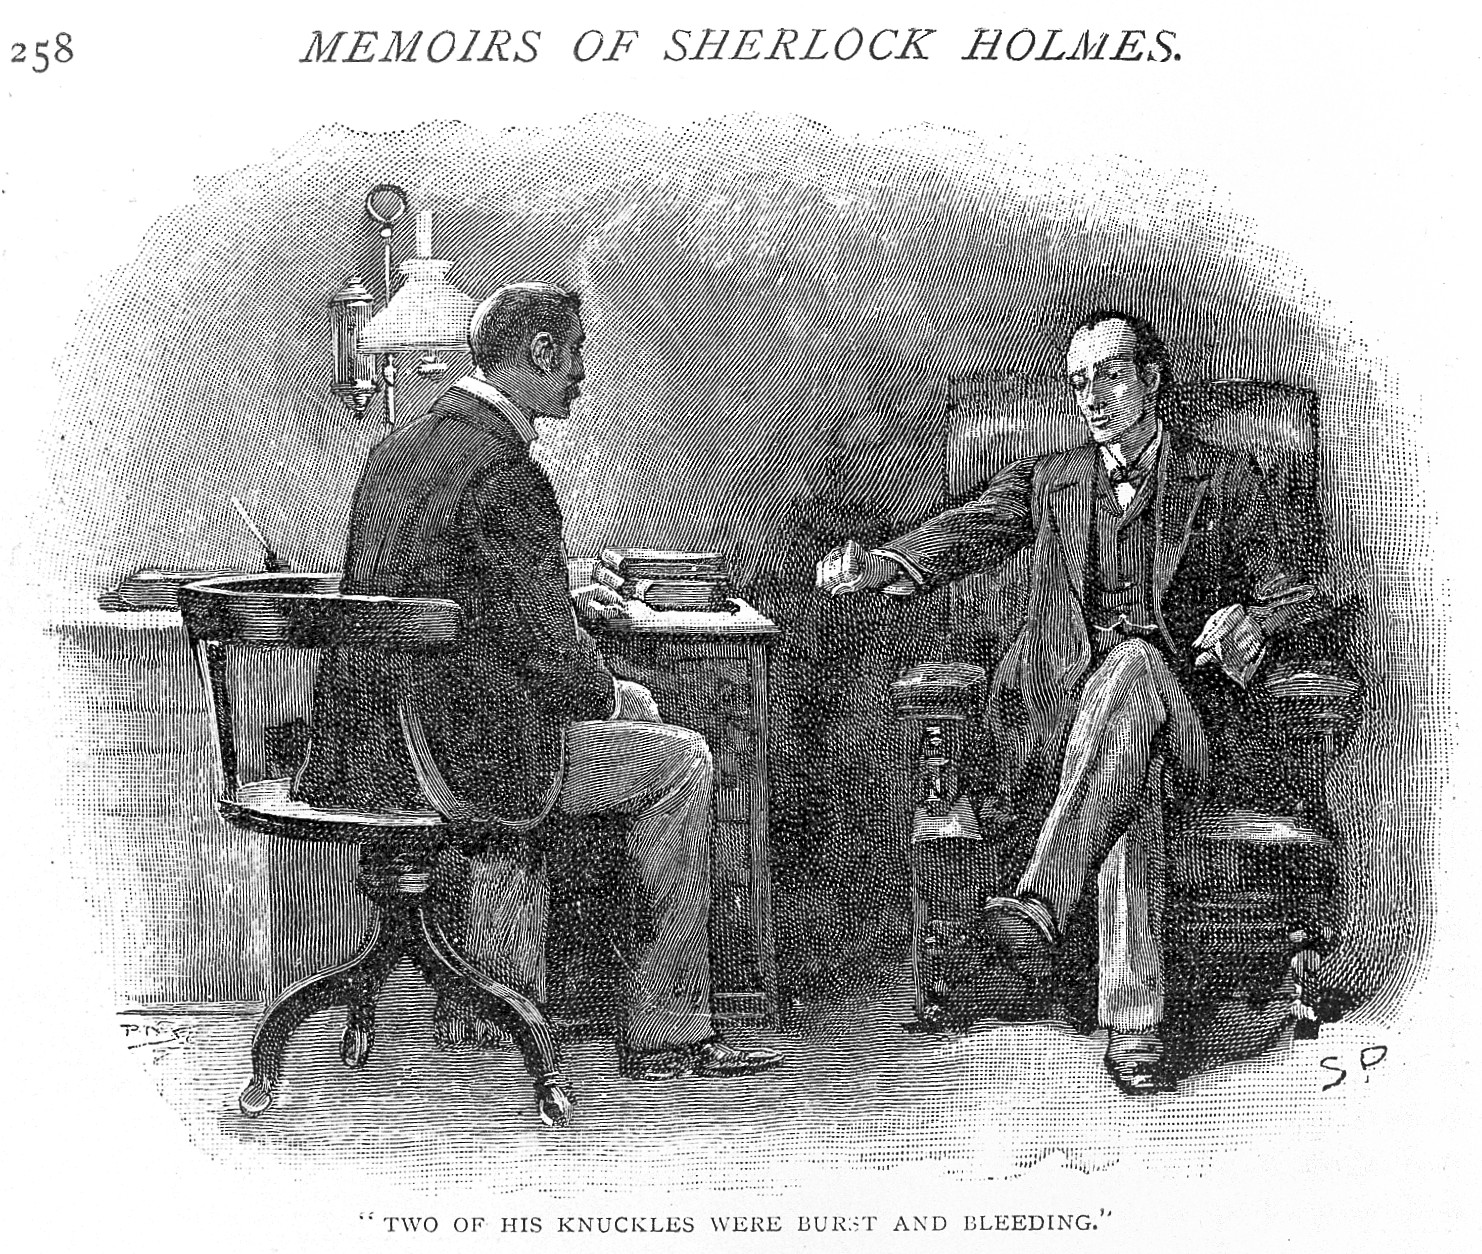 Two men are seated in a room, engaged in conversation. A caption underneath reads, "Two of his knuckles were burst and bleeding." The scene is from "Memoirs of Sherlock Holmes.